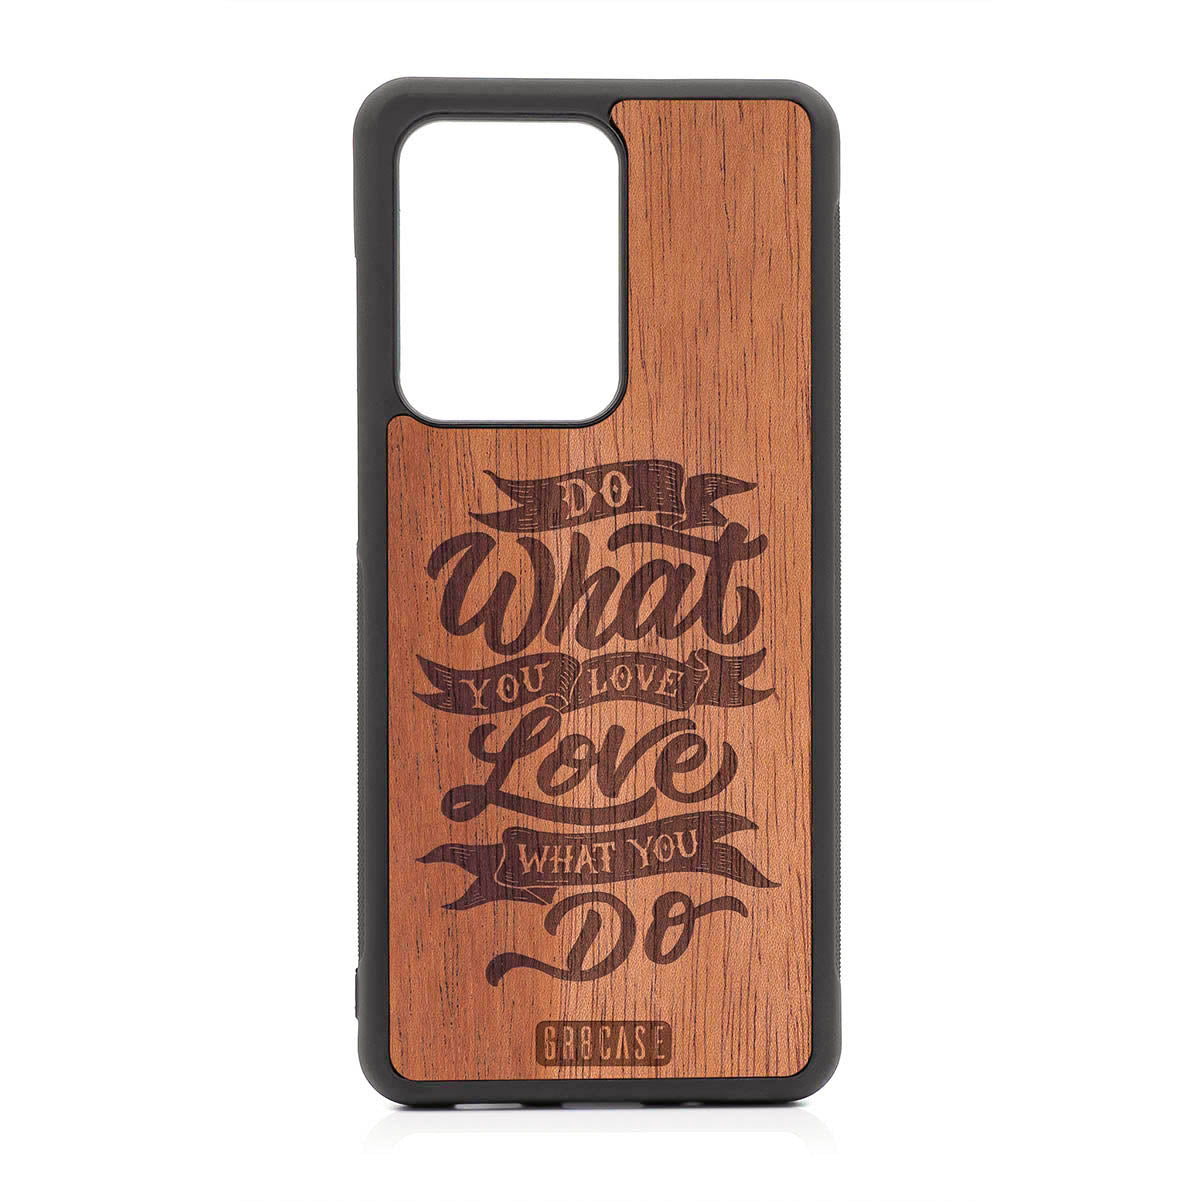 Do What You Love Love What You Do Design Wood Case For Samsung Galaxy S20 Ultra by GR8CASE